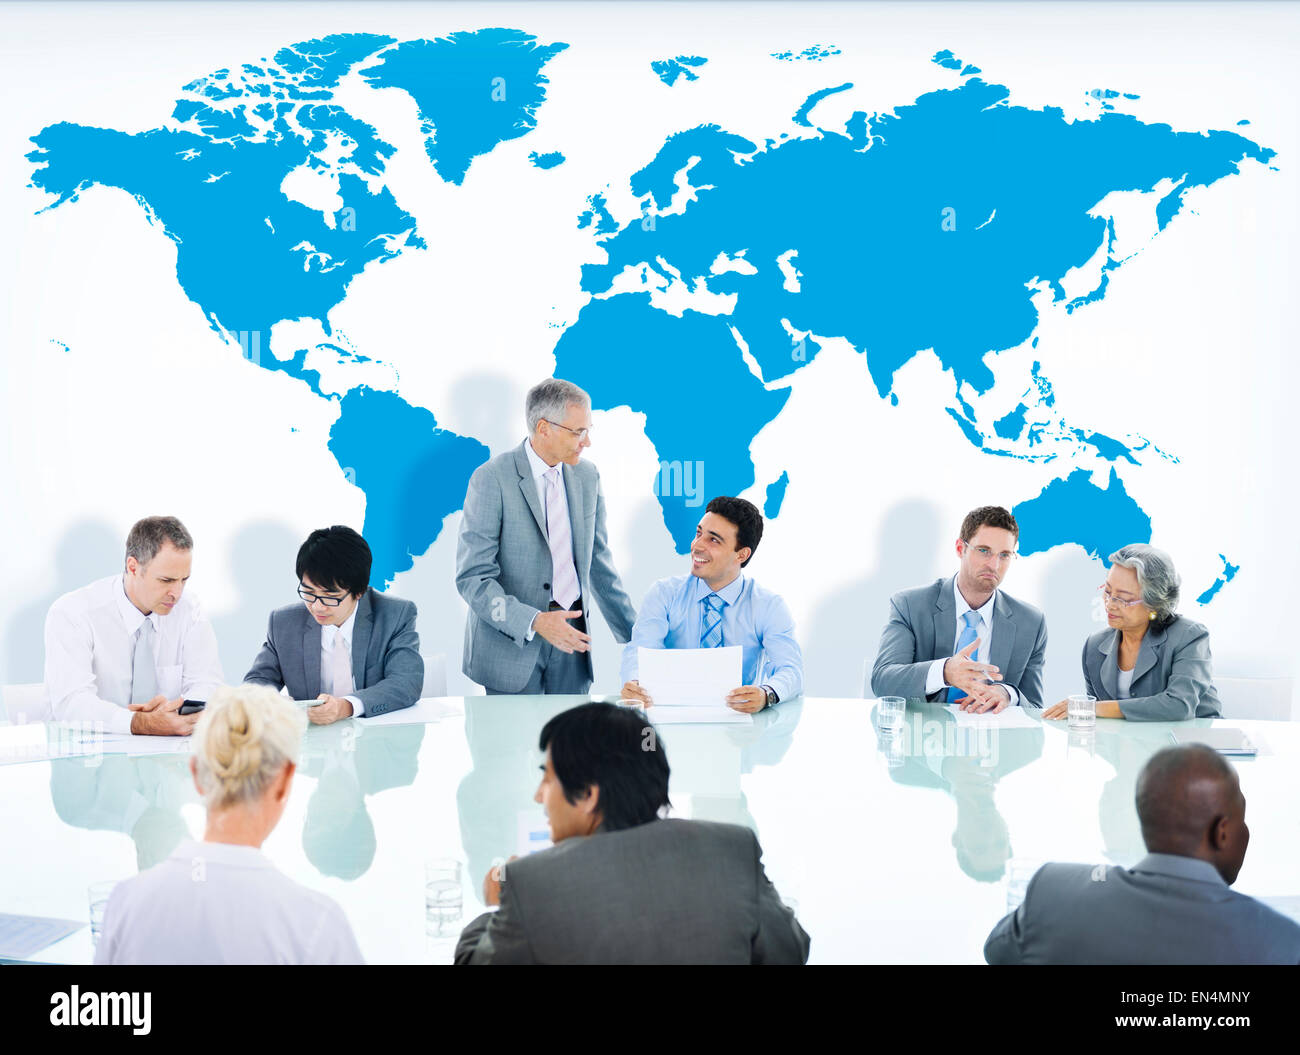 Business People Having a Discussion and World Map Stock Photo